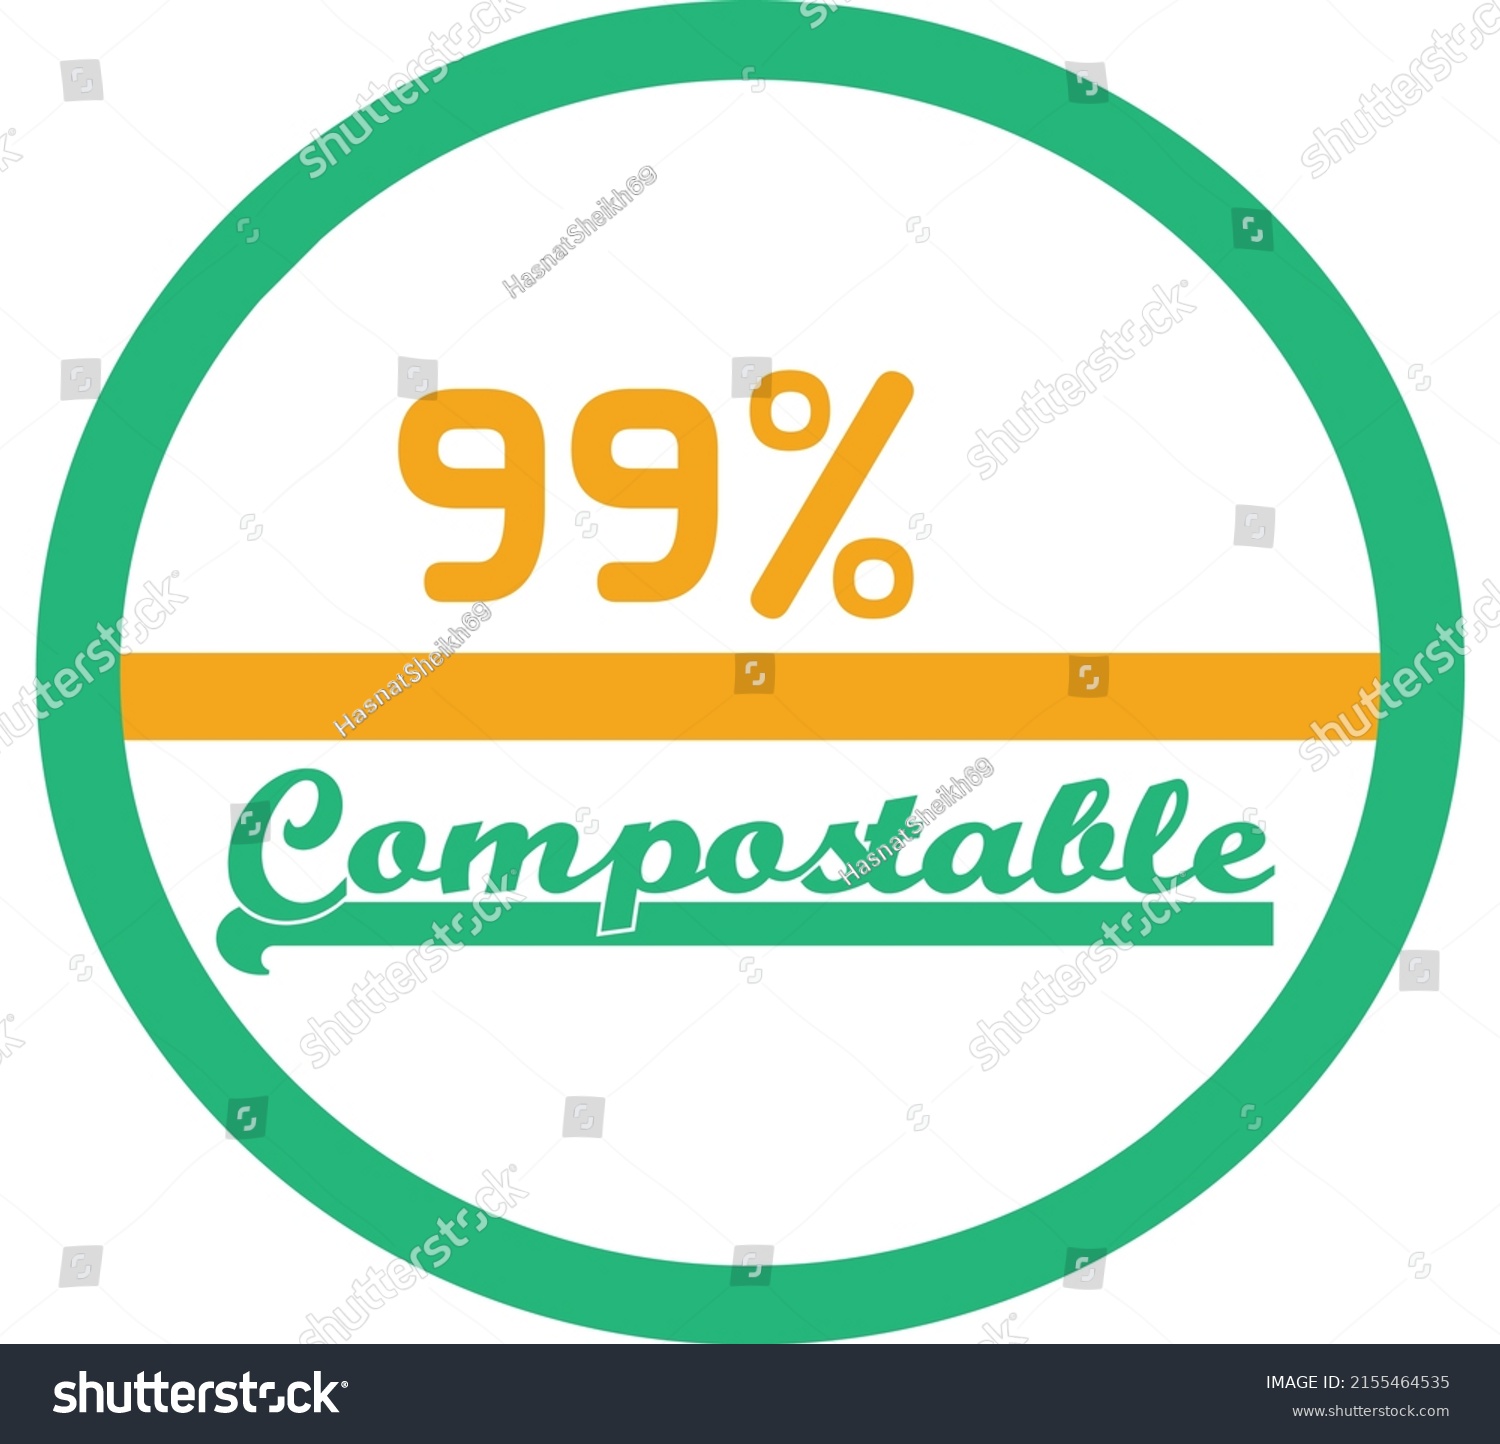 99% percentage compostable circular vector art illustration with fantastic looking font and yellow green color #2155464535